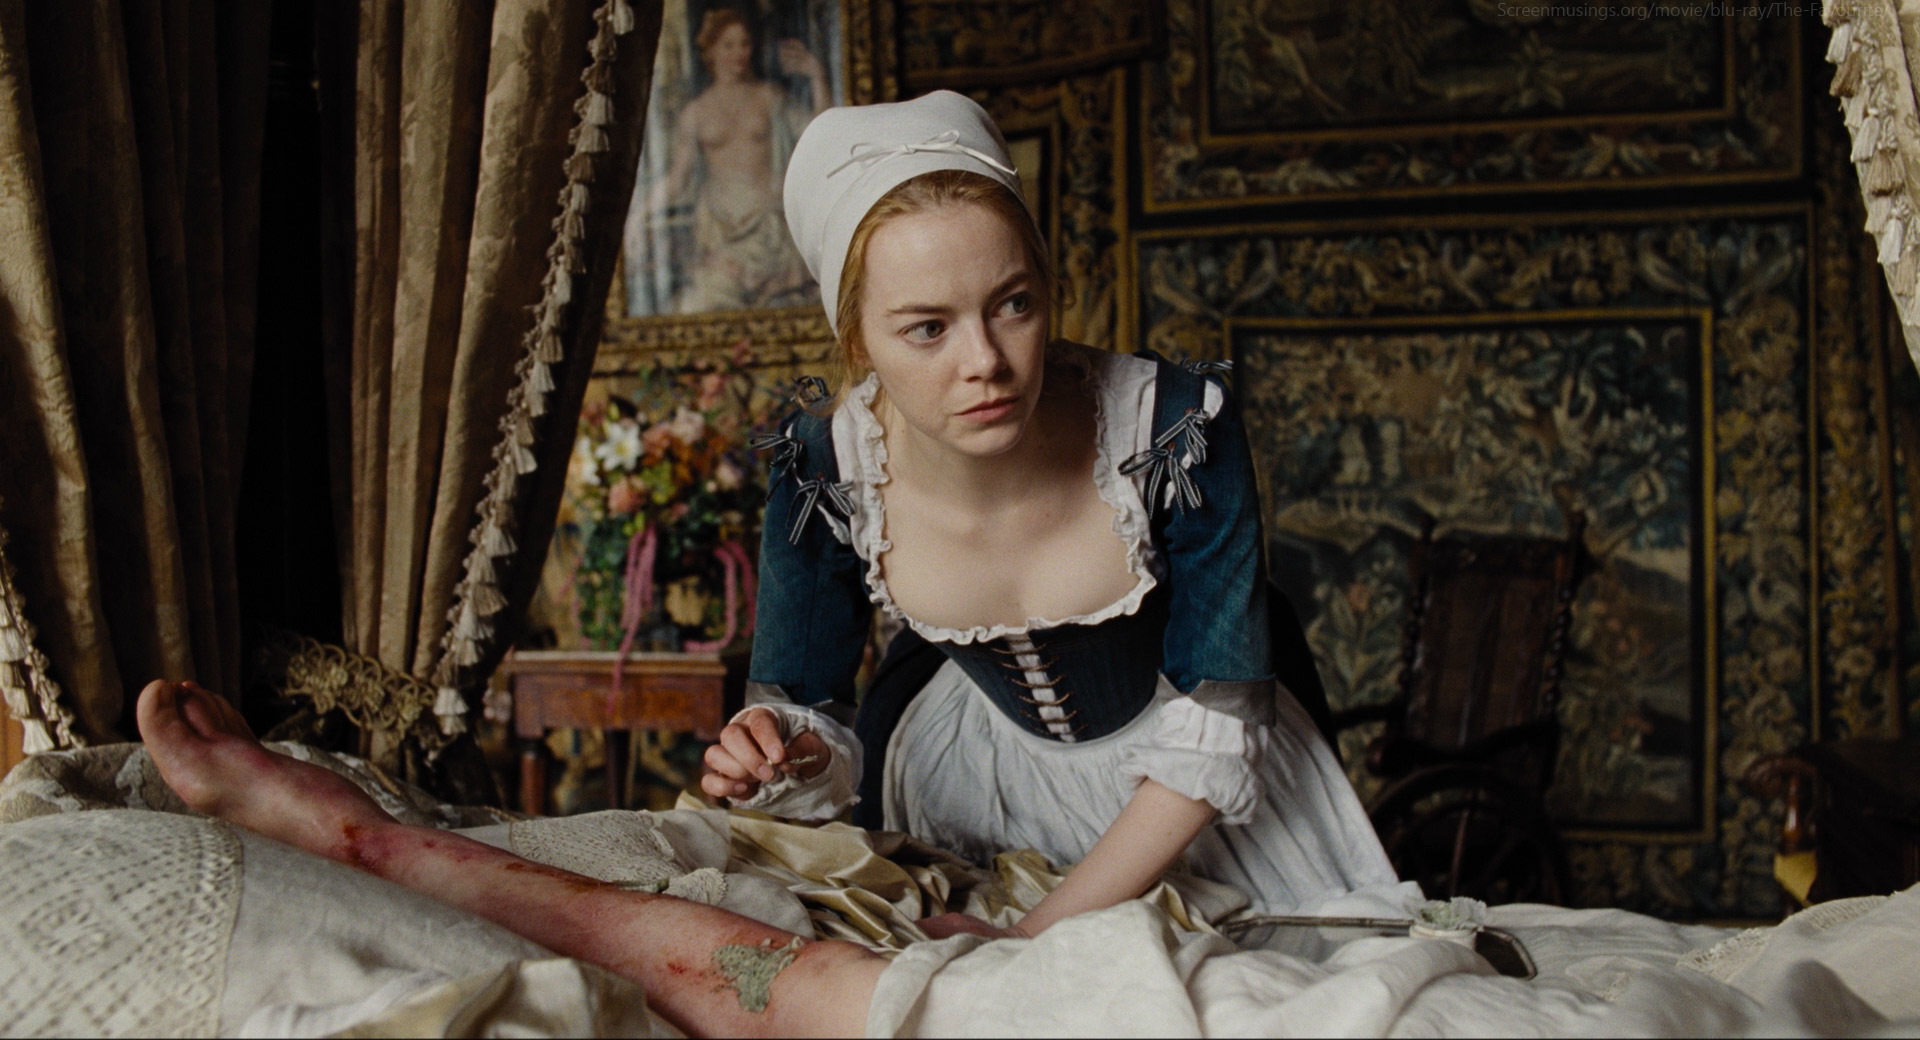 https://screenmusings.org/movie/blu-ray/The-Favourite/images/The-Favourite-058.jpg